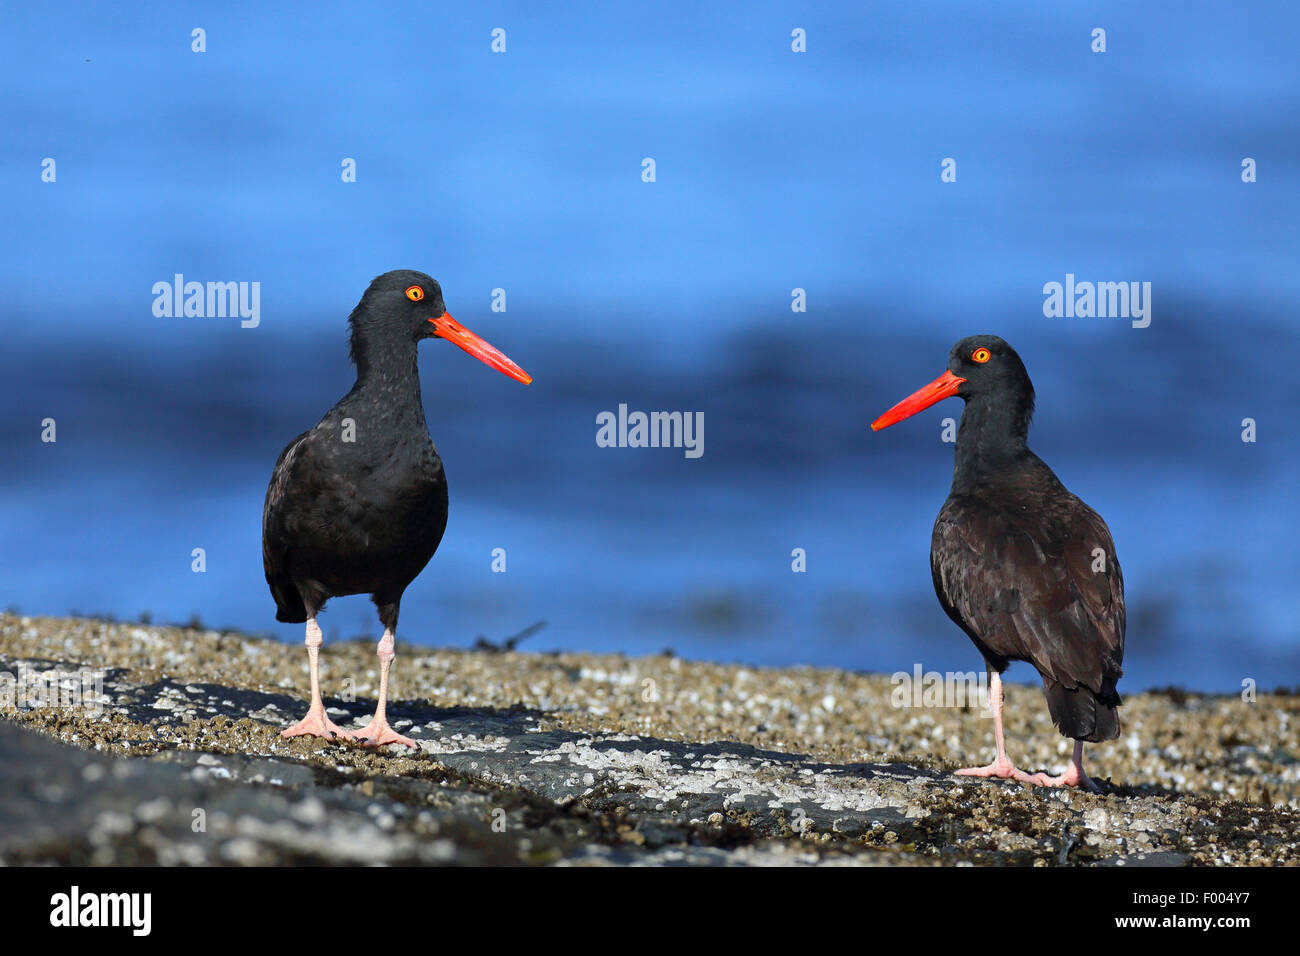 American black oystercatcher (Haematopus bachmani), two birds standing on a rock at the sea, Canada, Vancouver Island, Victoria Stock Photo